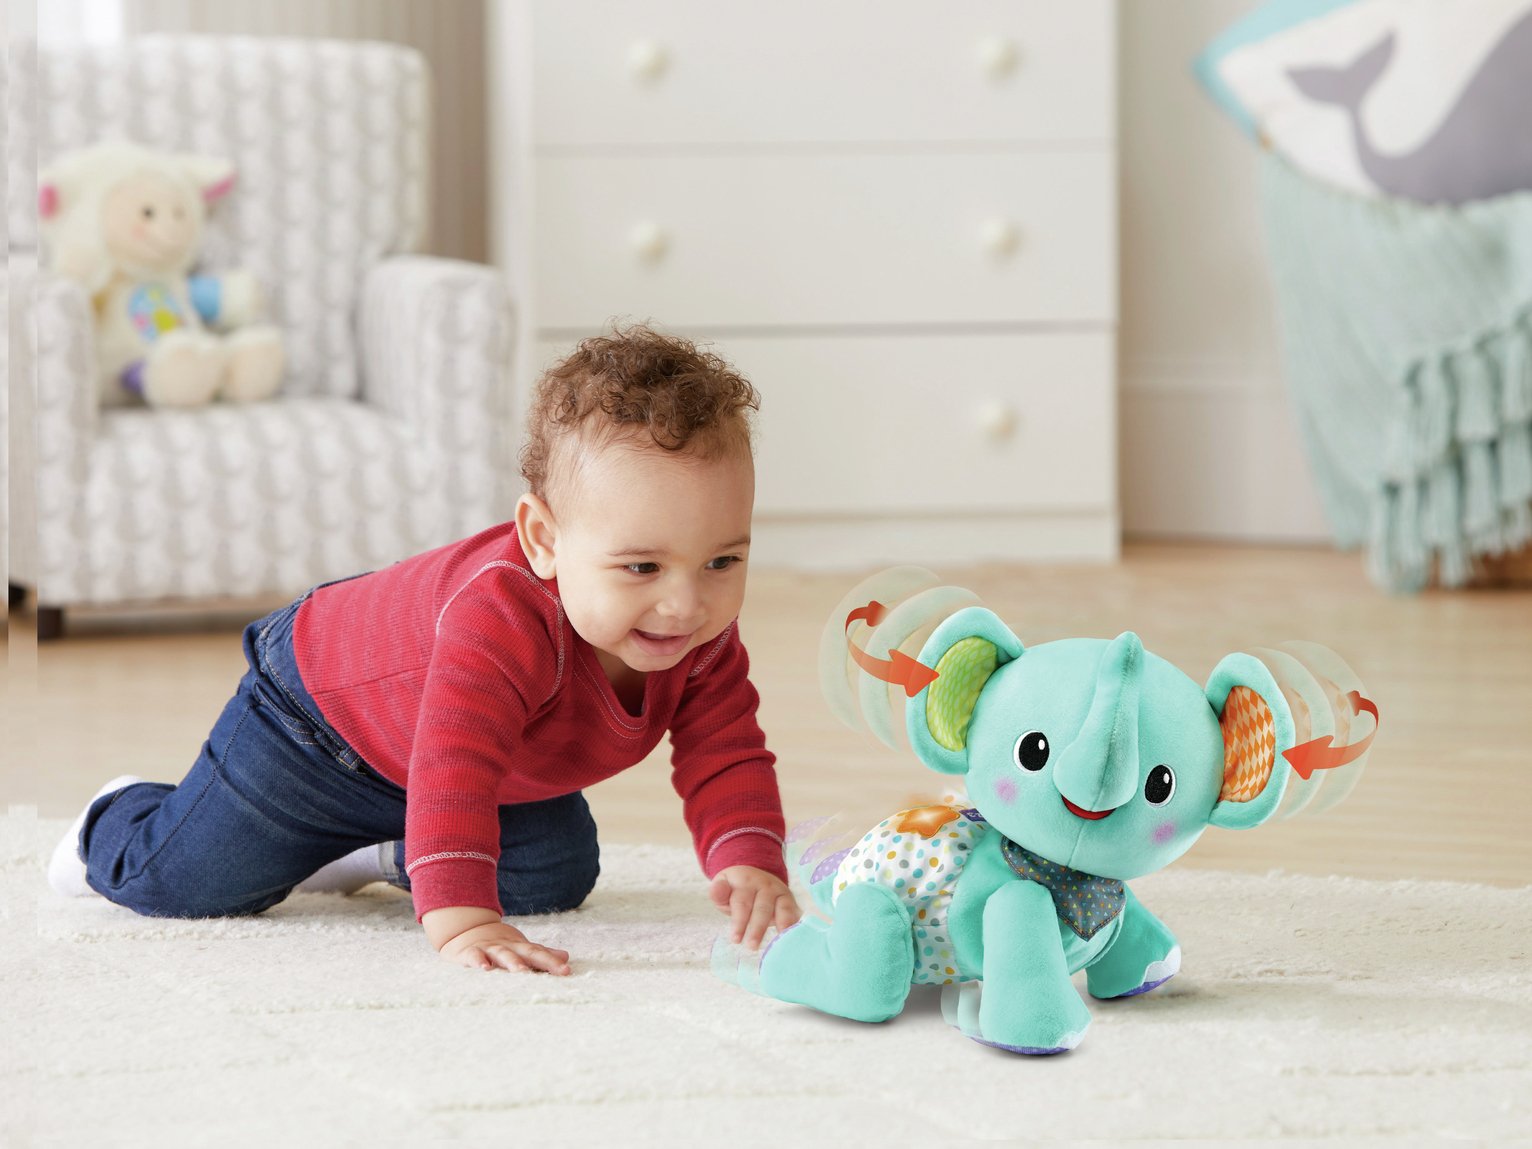 VTech Crawl with me Elephant Activity Toy Review